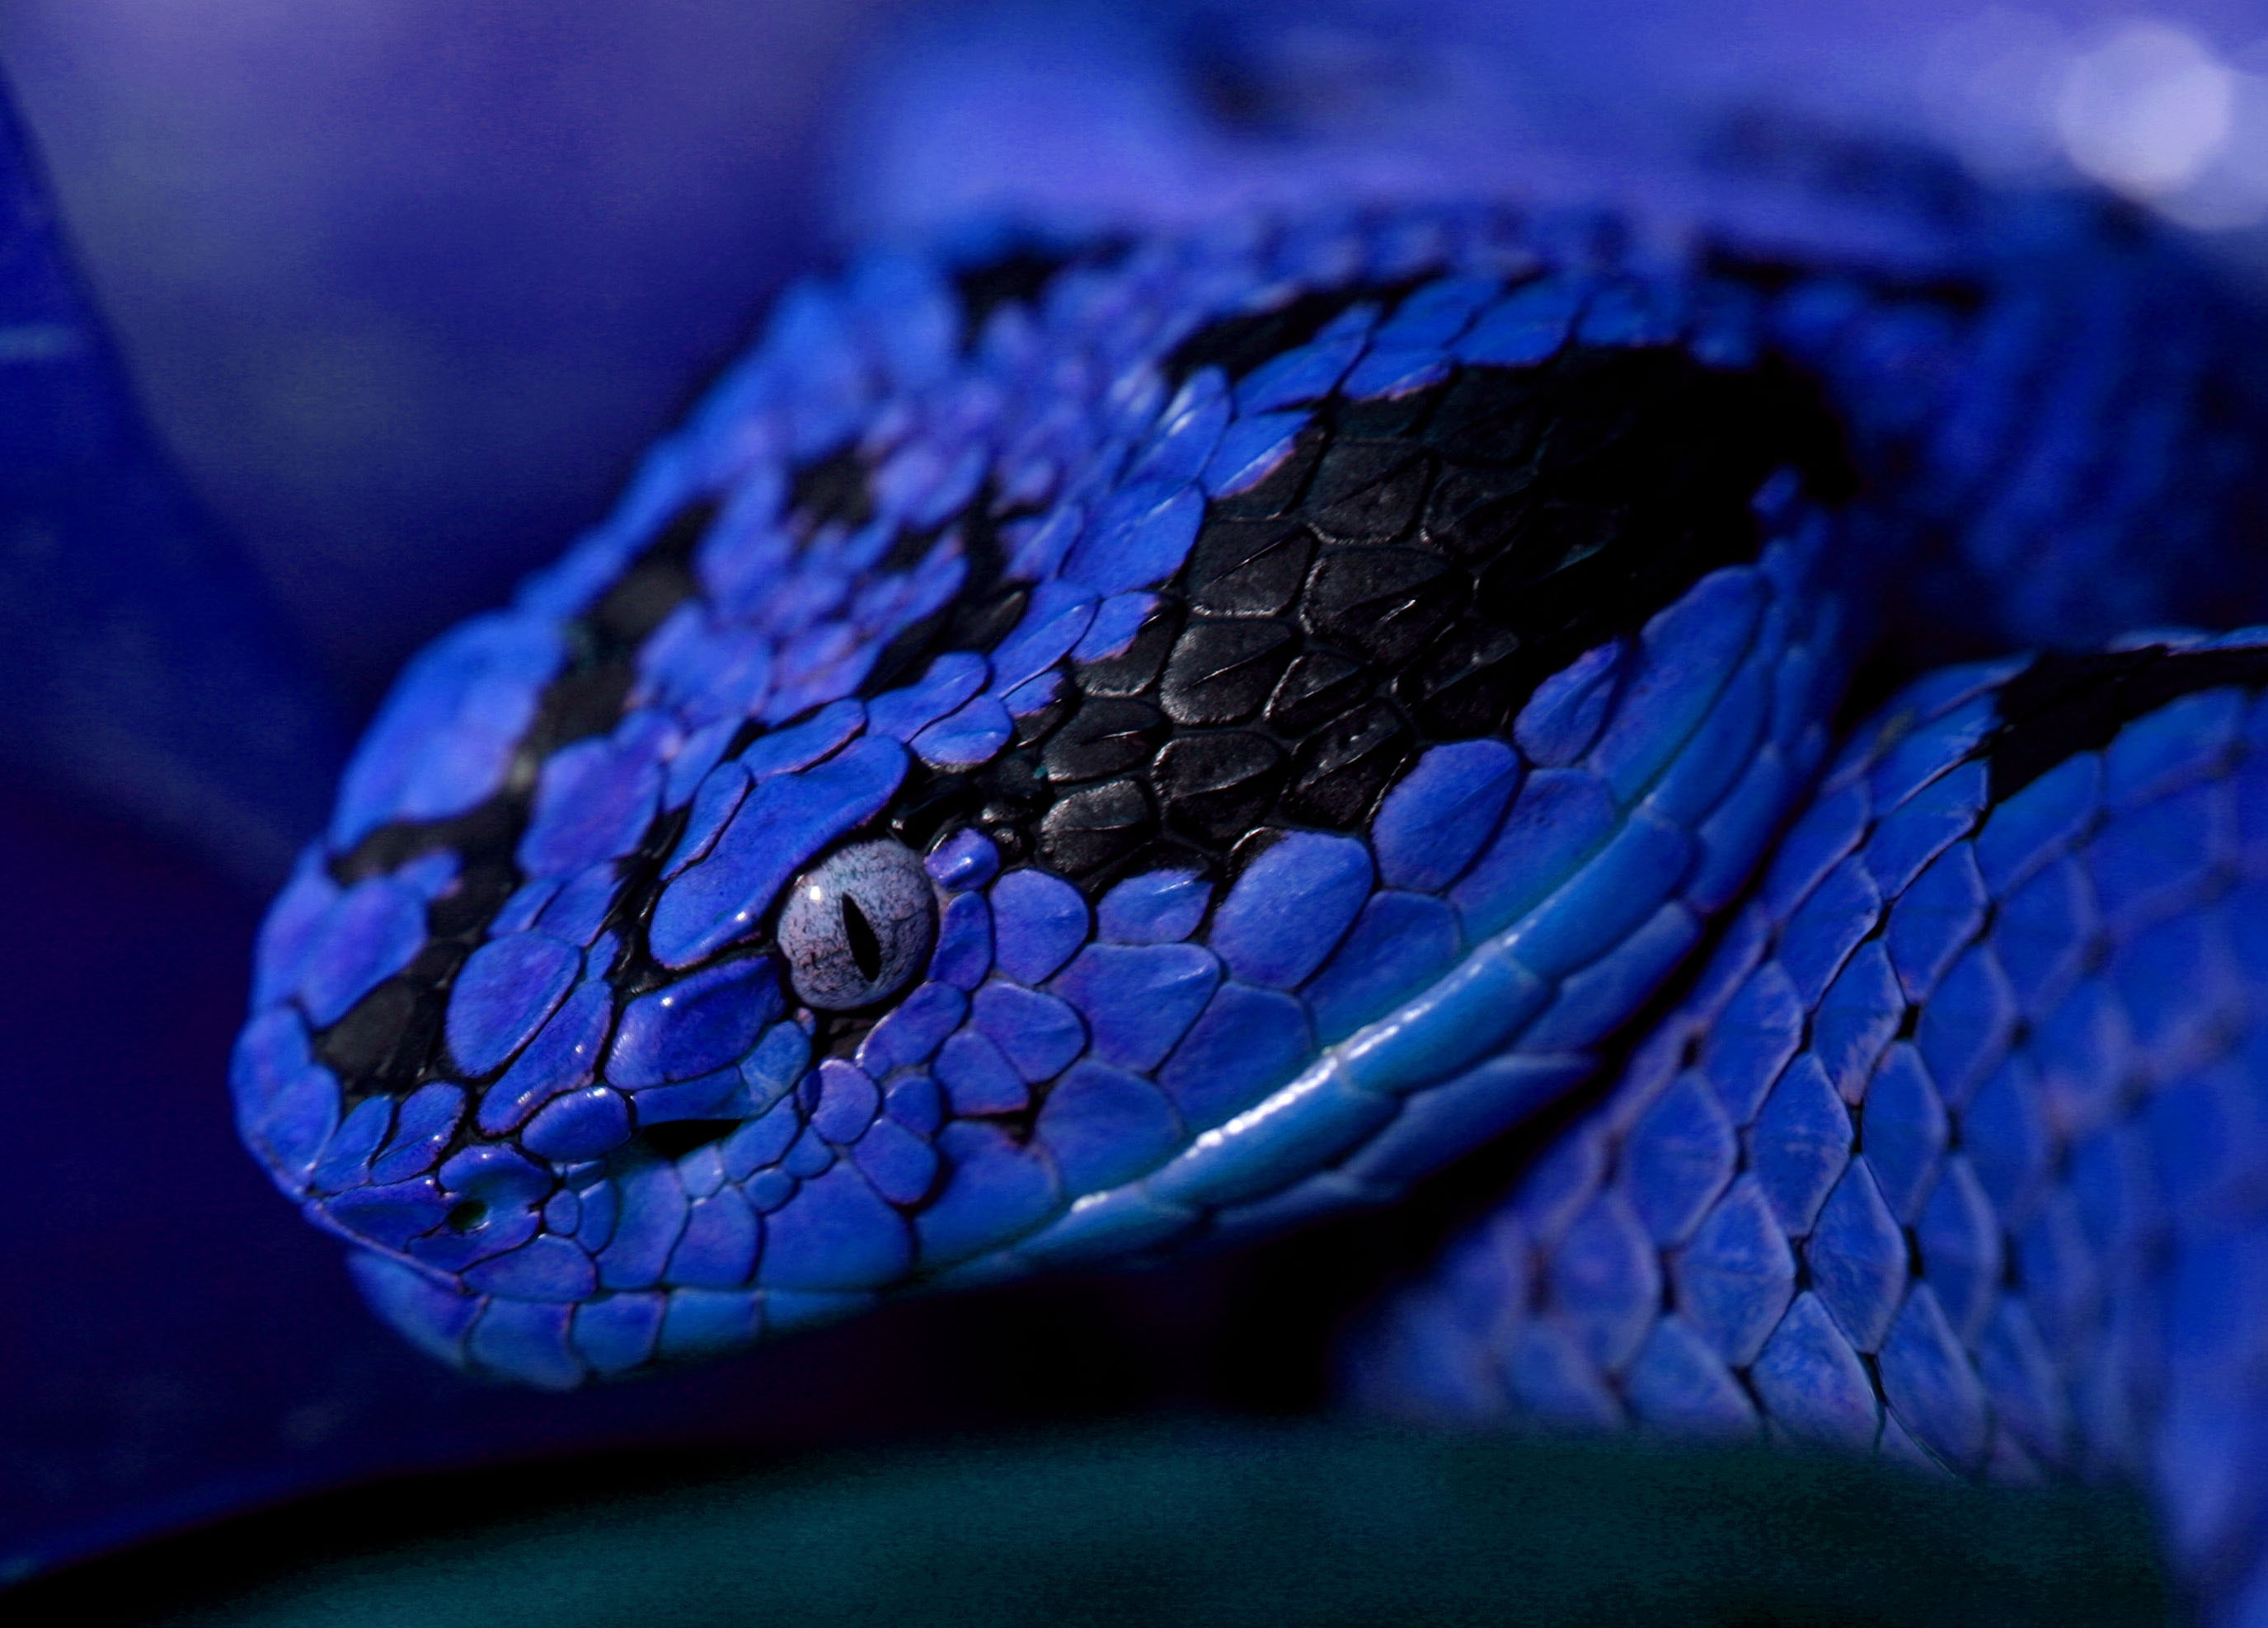 129360 download wallpaper snake, color, eyes, animals screensavers and pictures for free